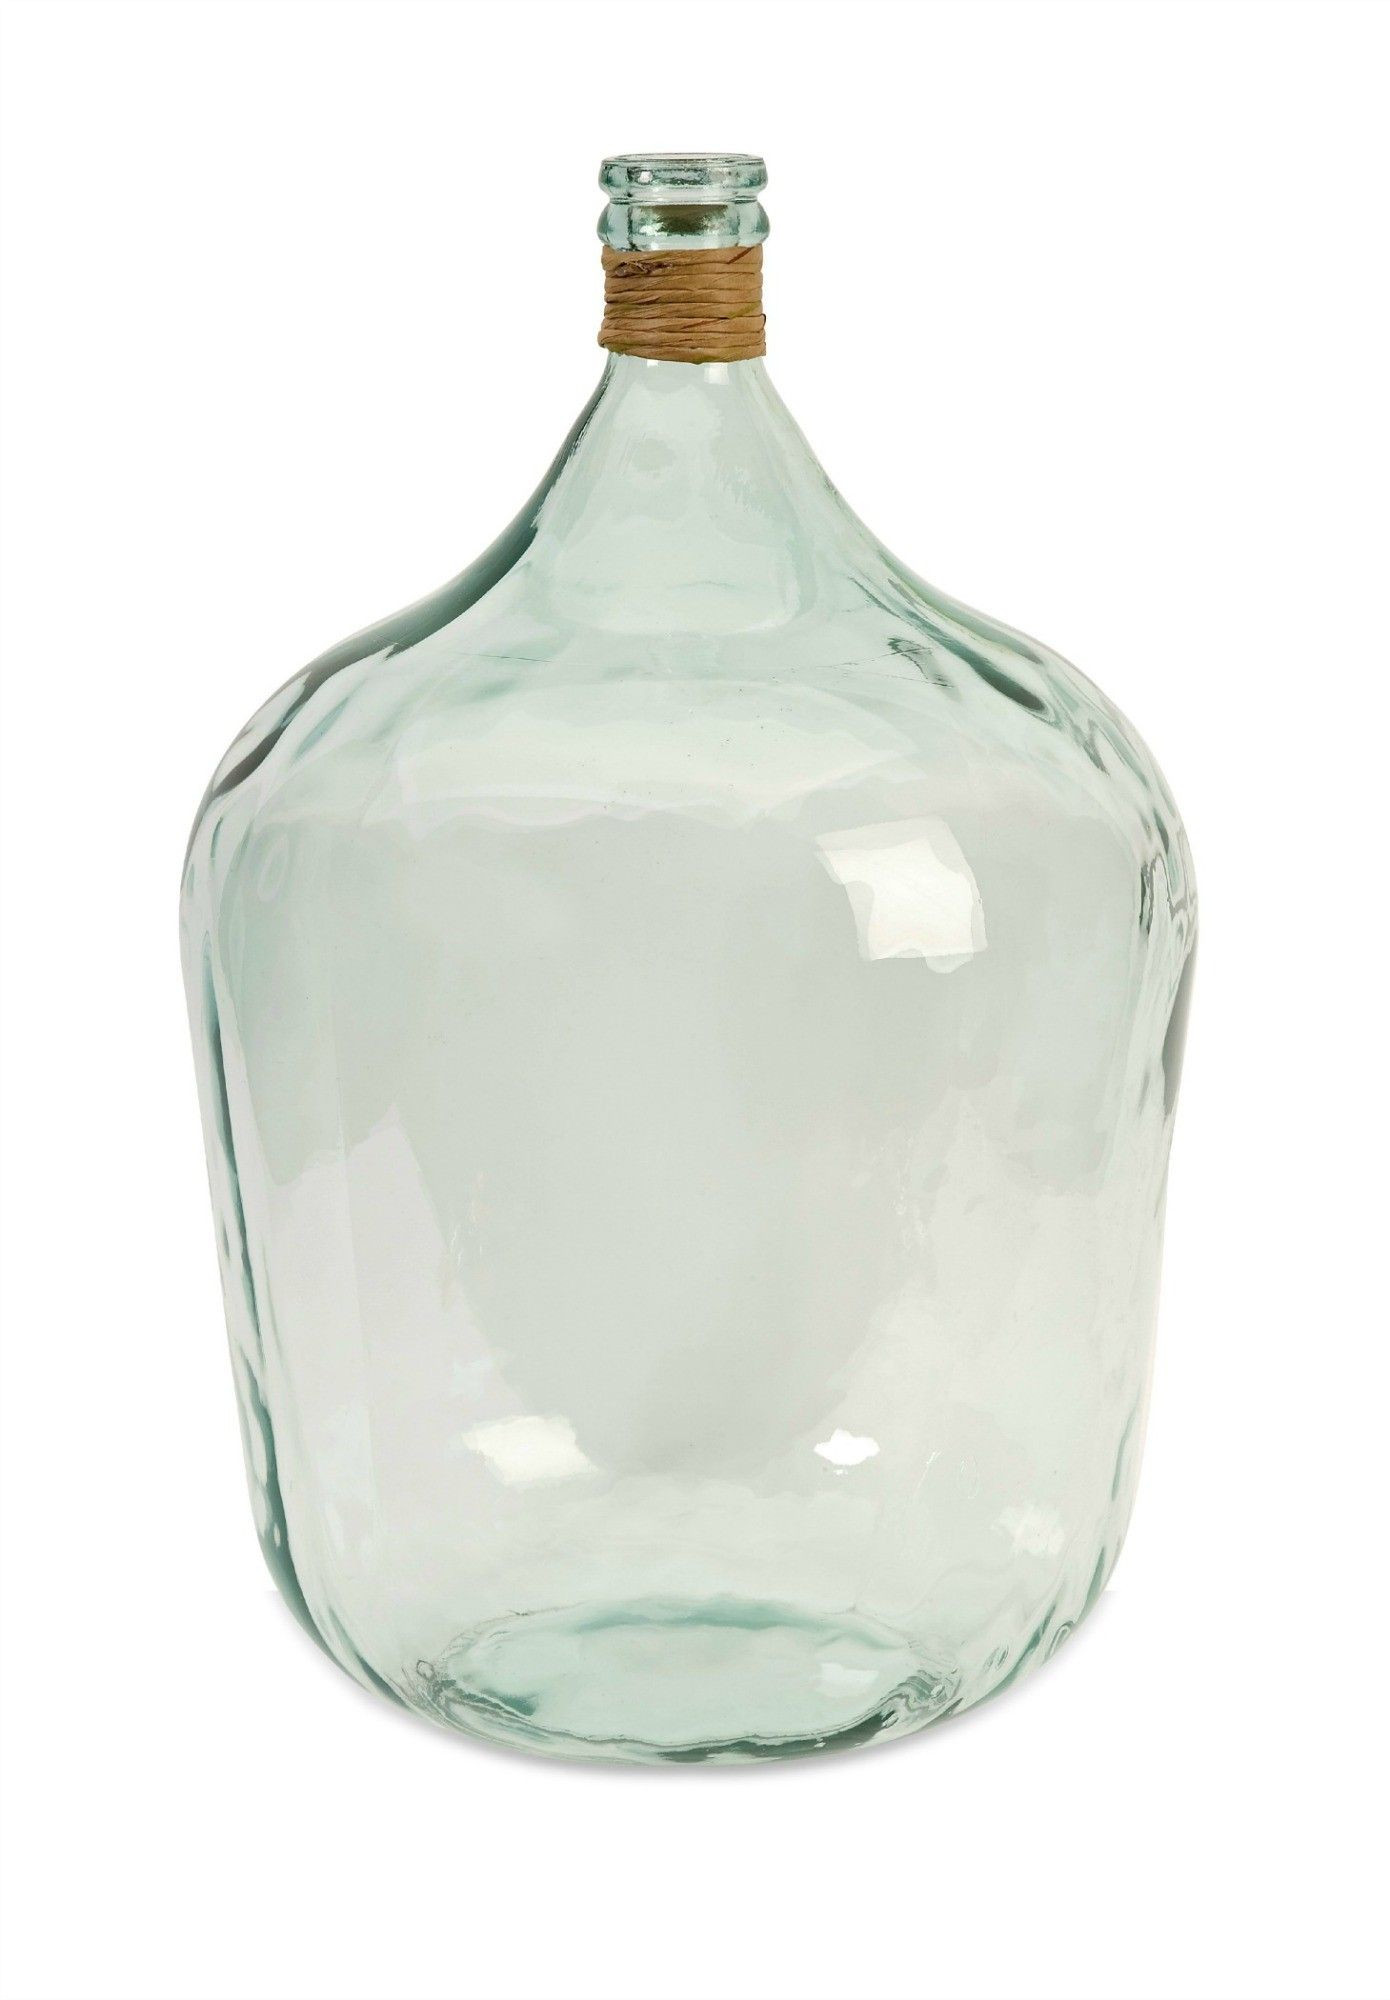 17 Amazing Tall Glass Bottle Vase 2024 free download tall glass bottle vase of boccioni large recycled glass jug would be pretty filled with intended for boccioni large recycled glass jug would be pretty filled with beach glass finds